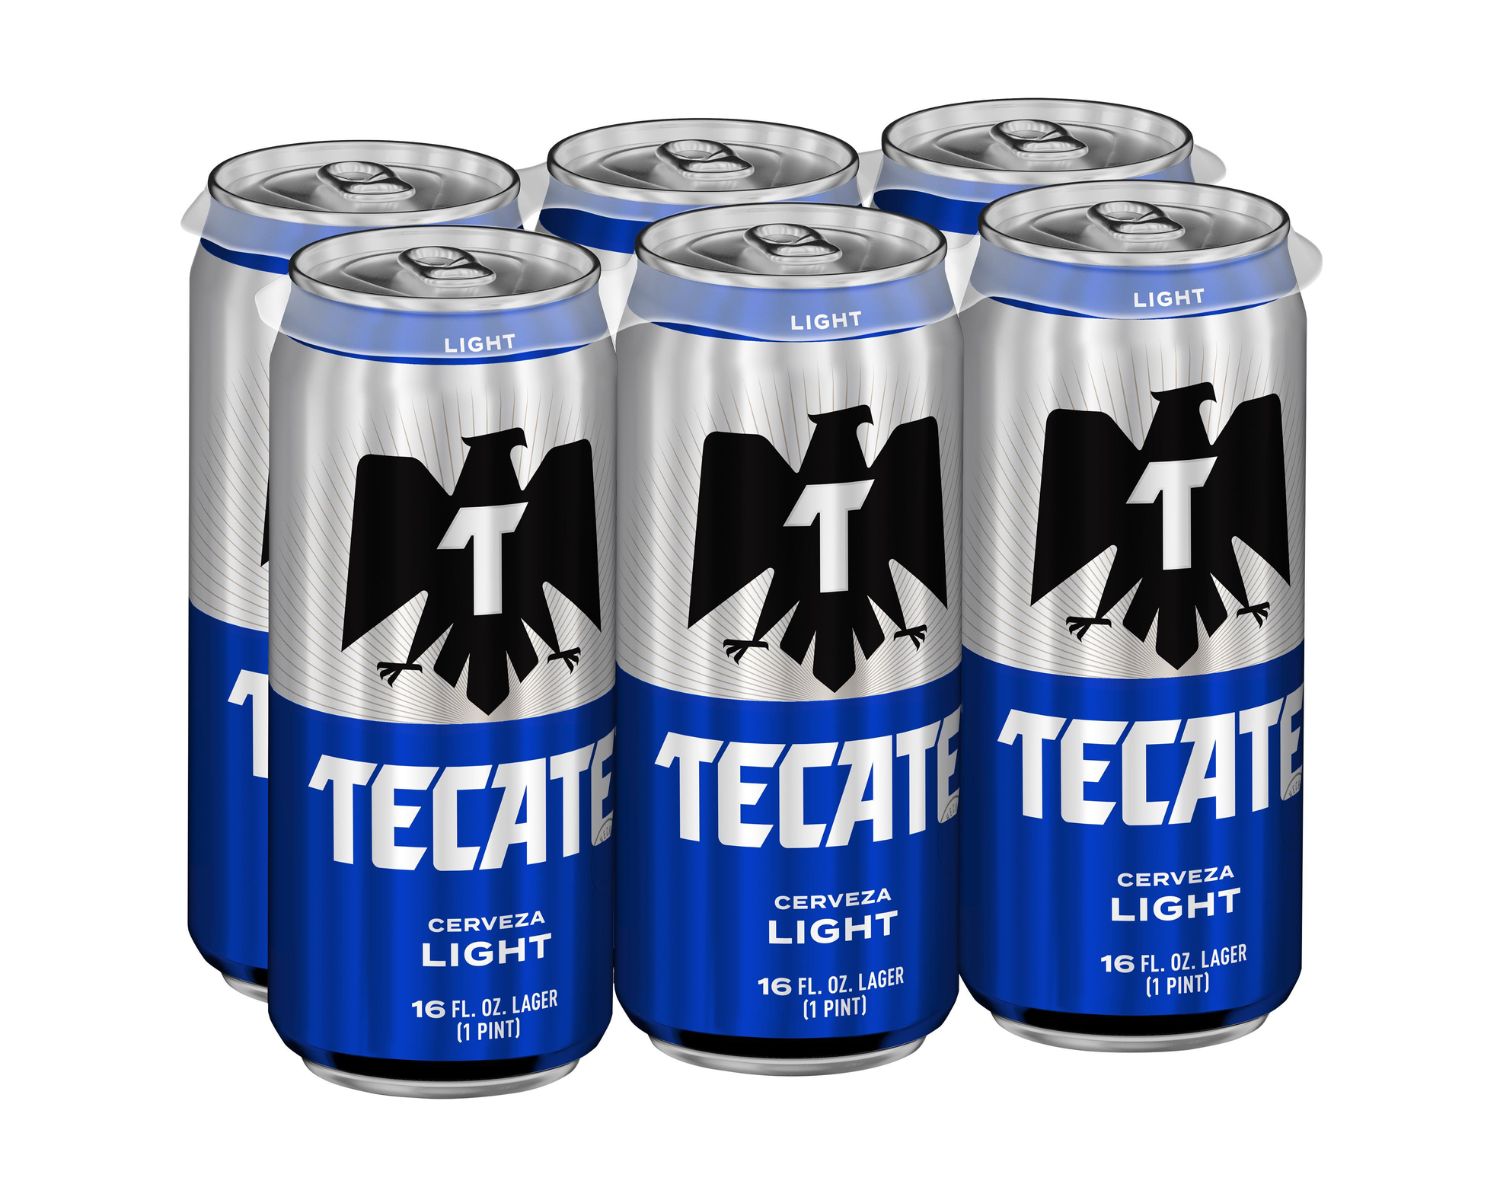 19-tecate-light-nutrition-facts